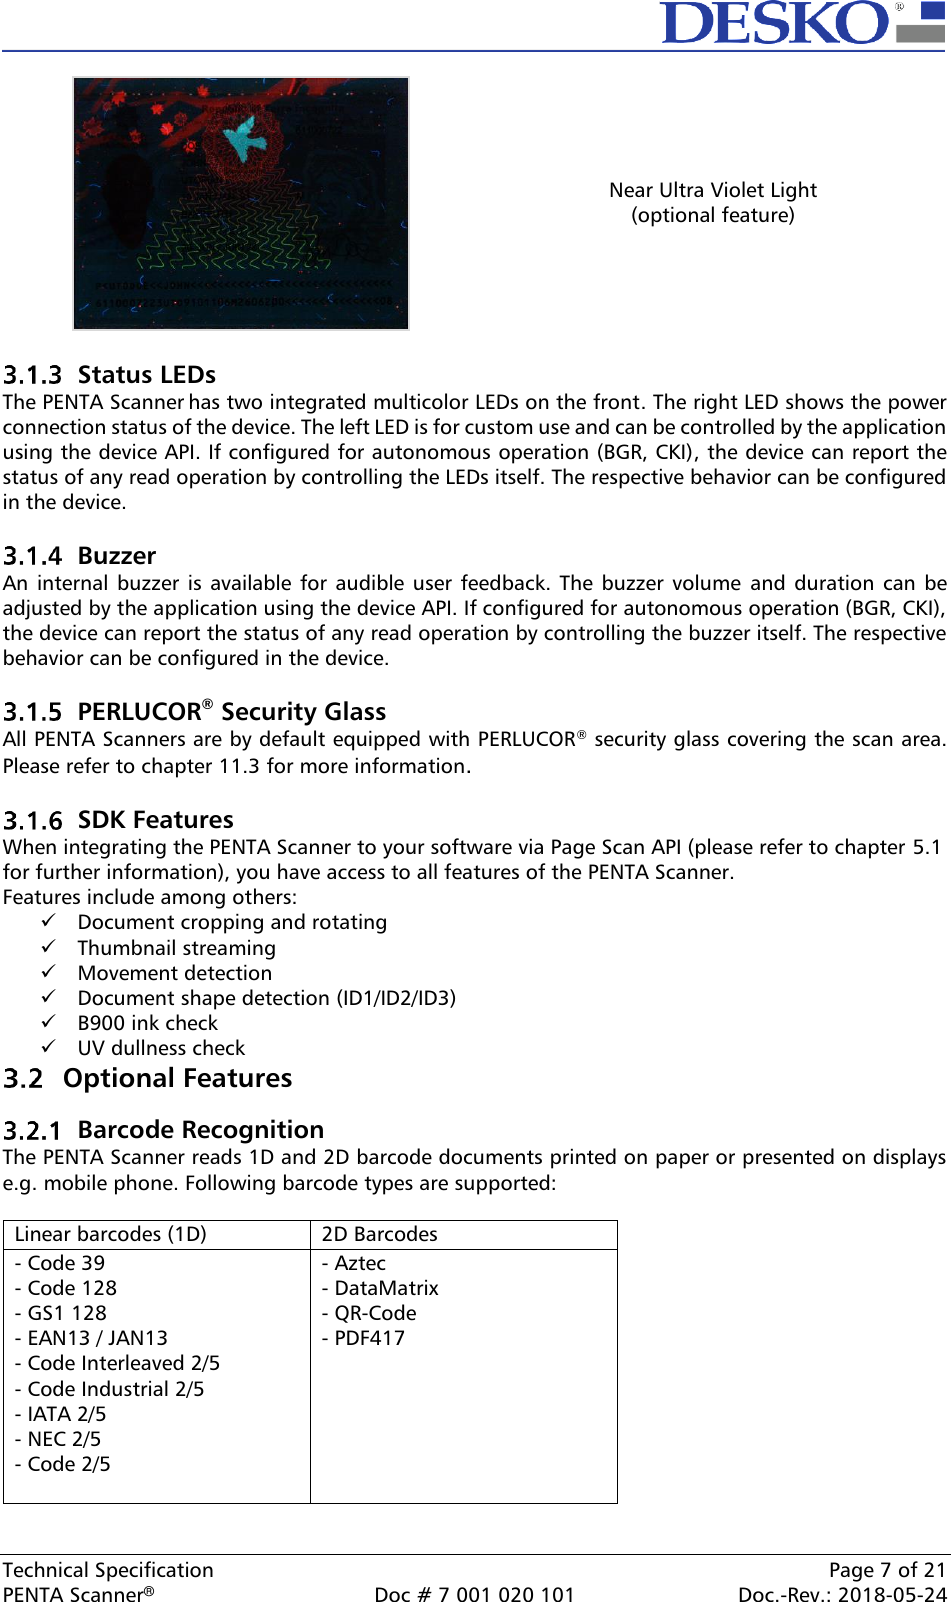  Technical Specification    Page 7 of 21 PENTA Scanner®  Doc # 7 001 020 101  Doc.-Rev.: 2018-05-24  Near Ultra Violet Light (optional feature)   Status LEDs  The PENTA Scanner has two integrated multicolor LEDs on the front. The right LED shows the power connection status of the device. The left LED is for custom use and can be controlled by the application using the device API. If configured for autonomous operation (BGR, CKI), the device can report the status of any read operation by controlling the LEDs itself. The respective behavior can be configured in the device.    Buzzer An  internal  buzzer  is  available for audible user  feedback.  The  buzzer  volume  and  duration  can  be adjusted by the application using the device API. If configured for autonomous operation (BGR, CKI), the device can report the status of any read operation by controlling the buzzer itself. The respective behavior can be configured in the device.   PERLUCOR® Security Glass All PENTA Scanners are by default equipped with PERLUCOR® security glass covering the scan area. Please refer to chapter 11.3 for more information.   SDK Features When integrating the PENTA Scanner to your software via Page Scan API (please refer to chapter 5.1 for further information), you have access to all features of the PENTA Scanner.  Features include among others:  ✓ Document cropping and rotating ✓ Thumbnail streaming ✓ Movement detection ✓ Document shape detection (ID1/ID2/ID3) ✓ B900 ink check  ✓ UV dullness check  Optional Features  Barcode Recognition  The PENTA Scanner reads 1D and 2D barcode documents printed on paper or presented on displays e.g. mobile phone. Following barcode types are supported:  Linear barcodes (1D) 2D Barcodes - Code 39 - Code 128 - GS1 128 - EAN13 / JAN13 - Code Interleaved 2/5 - Code Industrial 2/5 - IATA 2/5 - NEC 2/5 - Code 2/5 - Aztec - DataMatrix - QR-Code - PDF417  